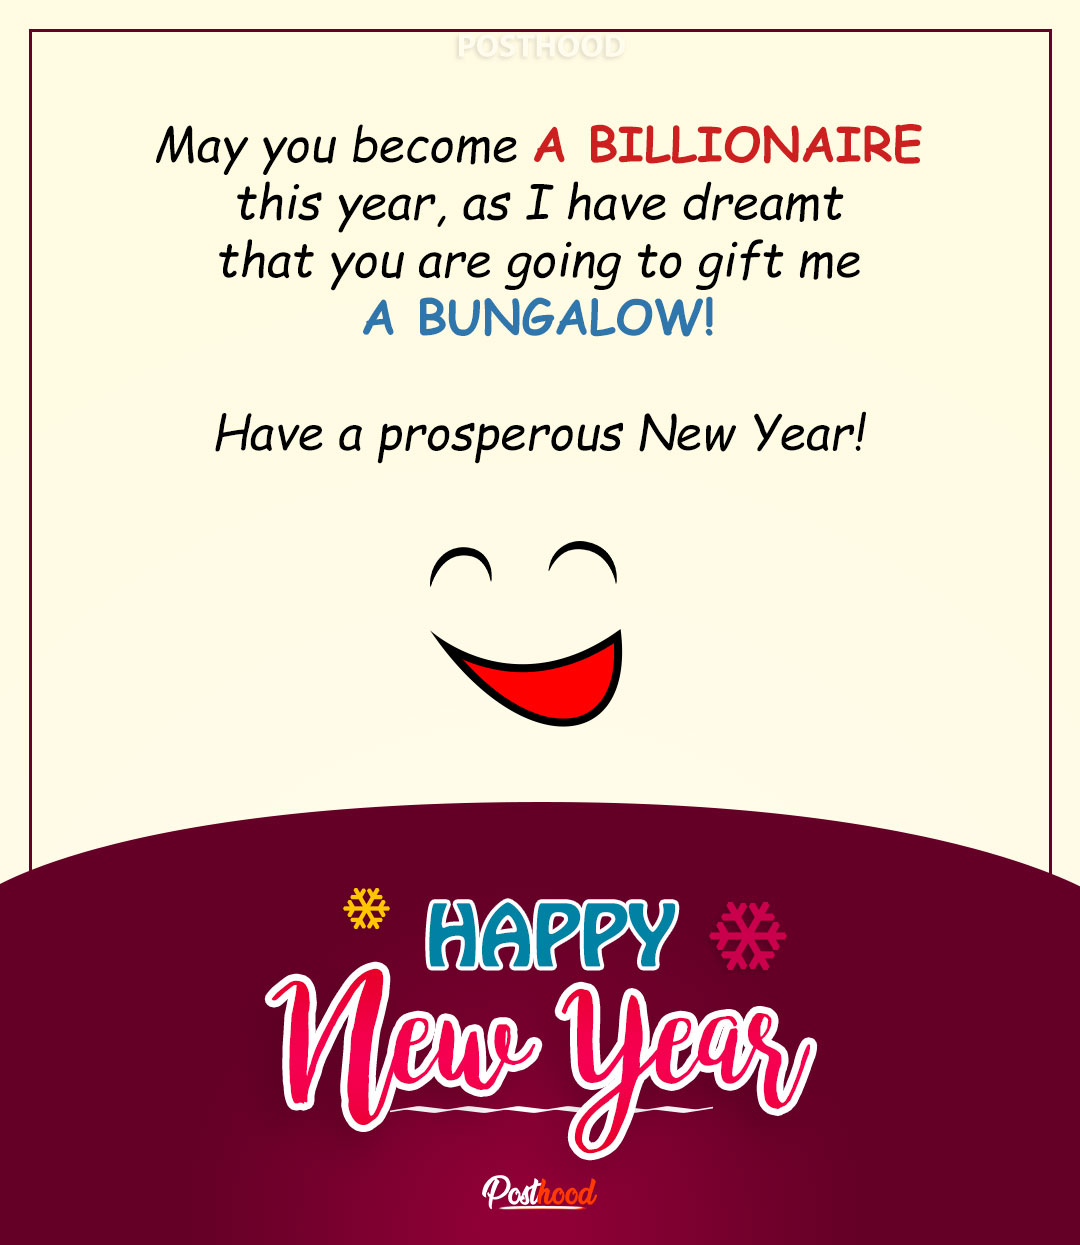 Send this funny New Year wishes to your dreamer friends. A funny billion dollar New Year wishes to warm up their dreams again. 